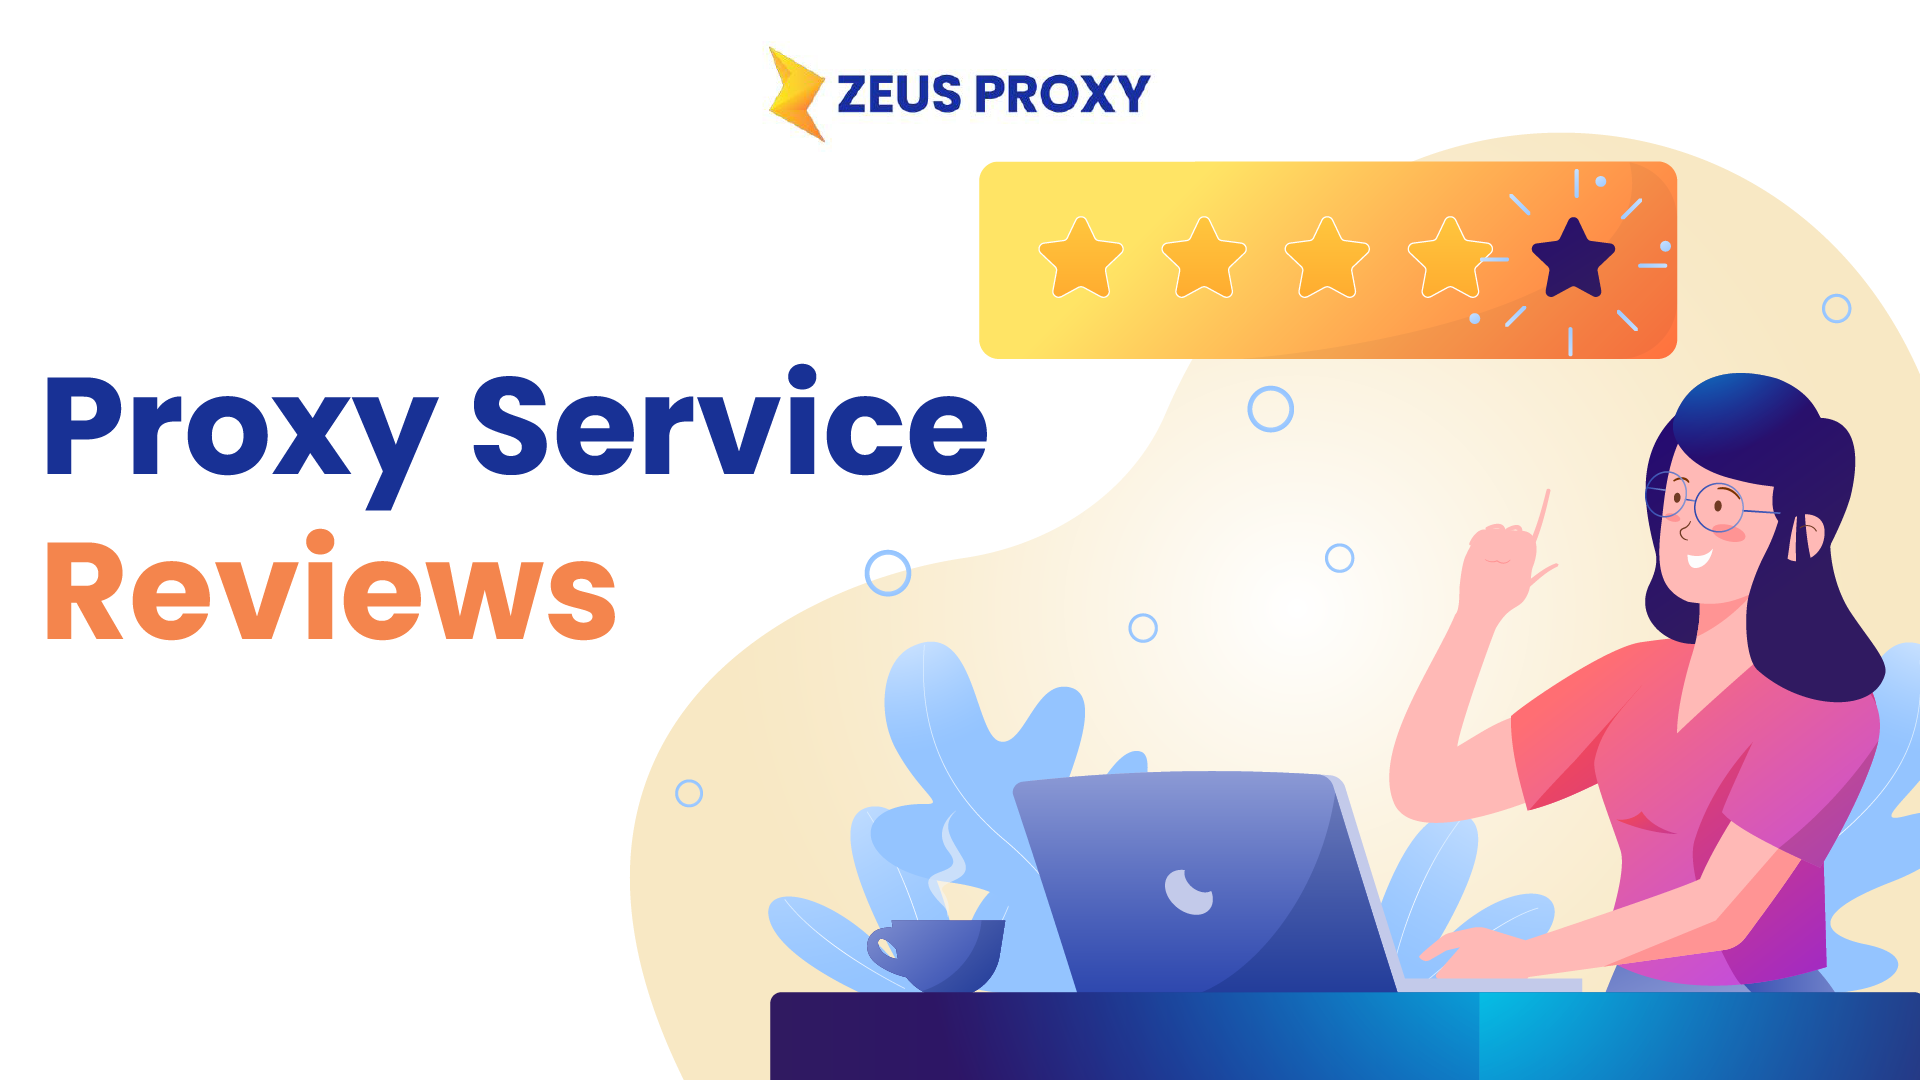 Where can you read reviews about proxy services?